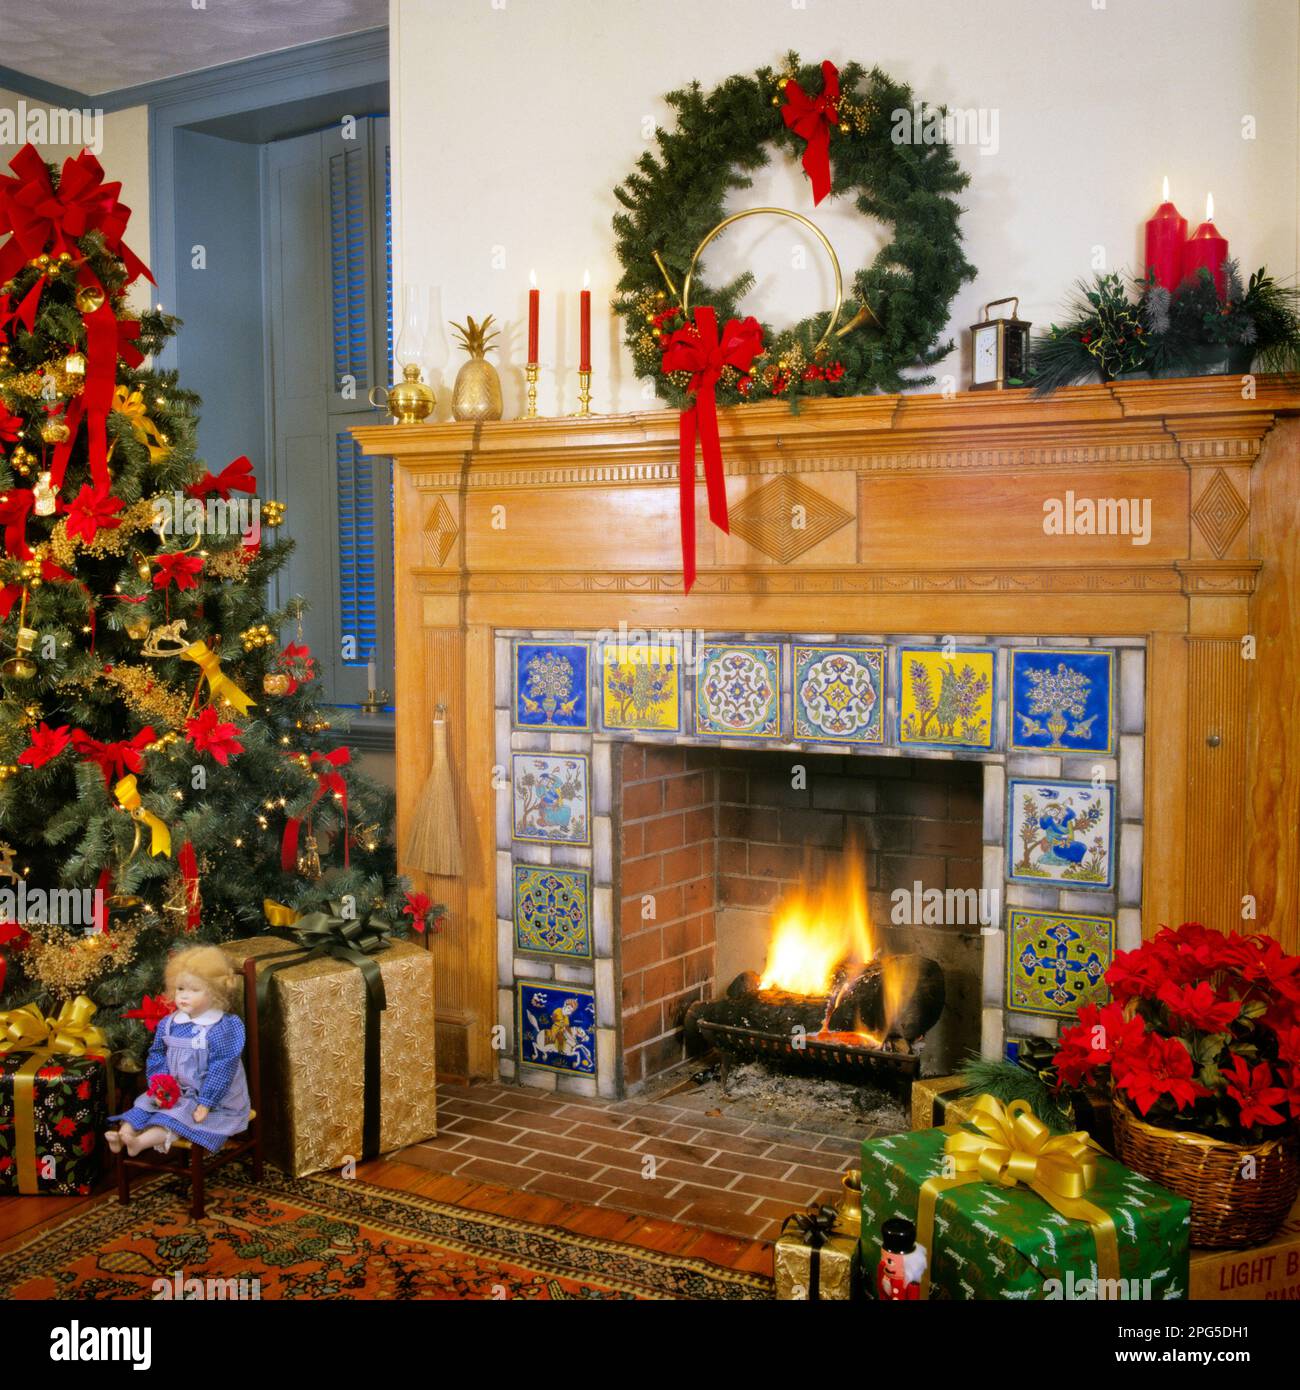 1980s LIVING ROOM WITH WREATH AND CANDLES ABOVE TILED FIREPLACE CHRISTMAS TREE AND WRAPPED PRESENTS  - kx11400 BAR007 HARS DECEMBER 25 INTERIOR DESIGN STYLISH TILED CREATIVITY HOME DECOR JOYOUS YULE FURNISHINGS OLD FASHIONED Stock Photo